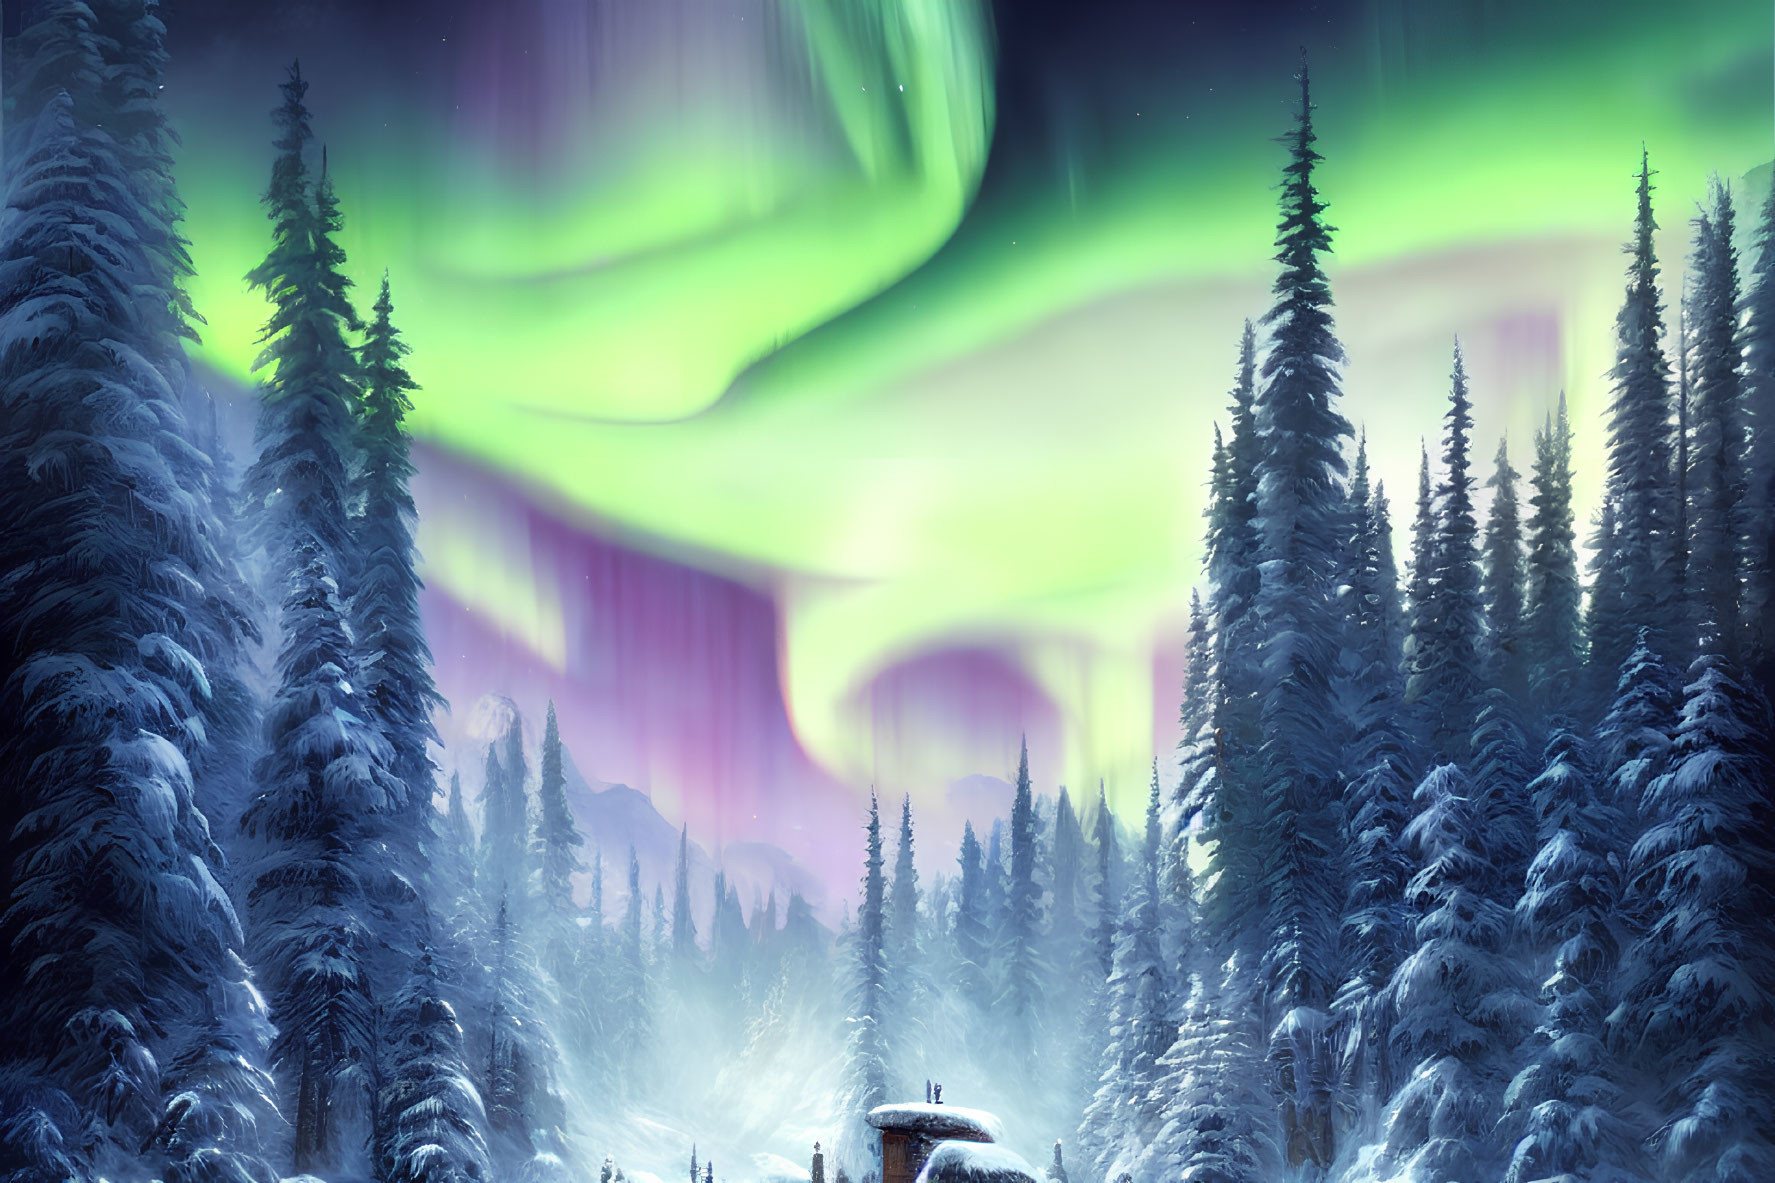 Snowy forest landscape under night sky with aurora borealis